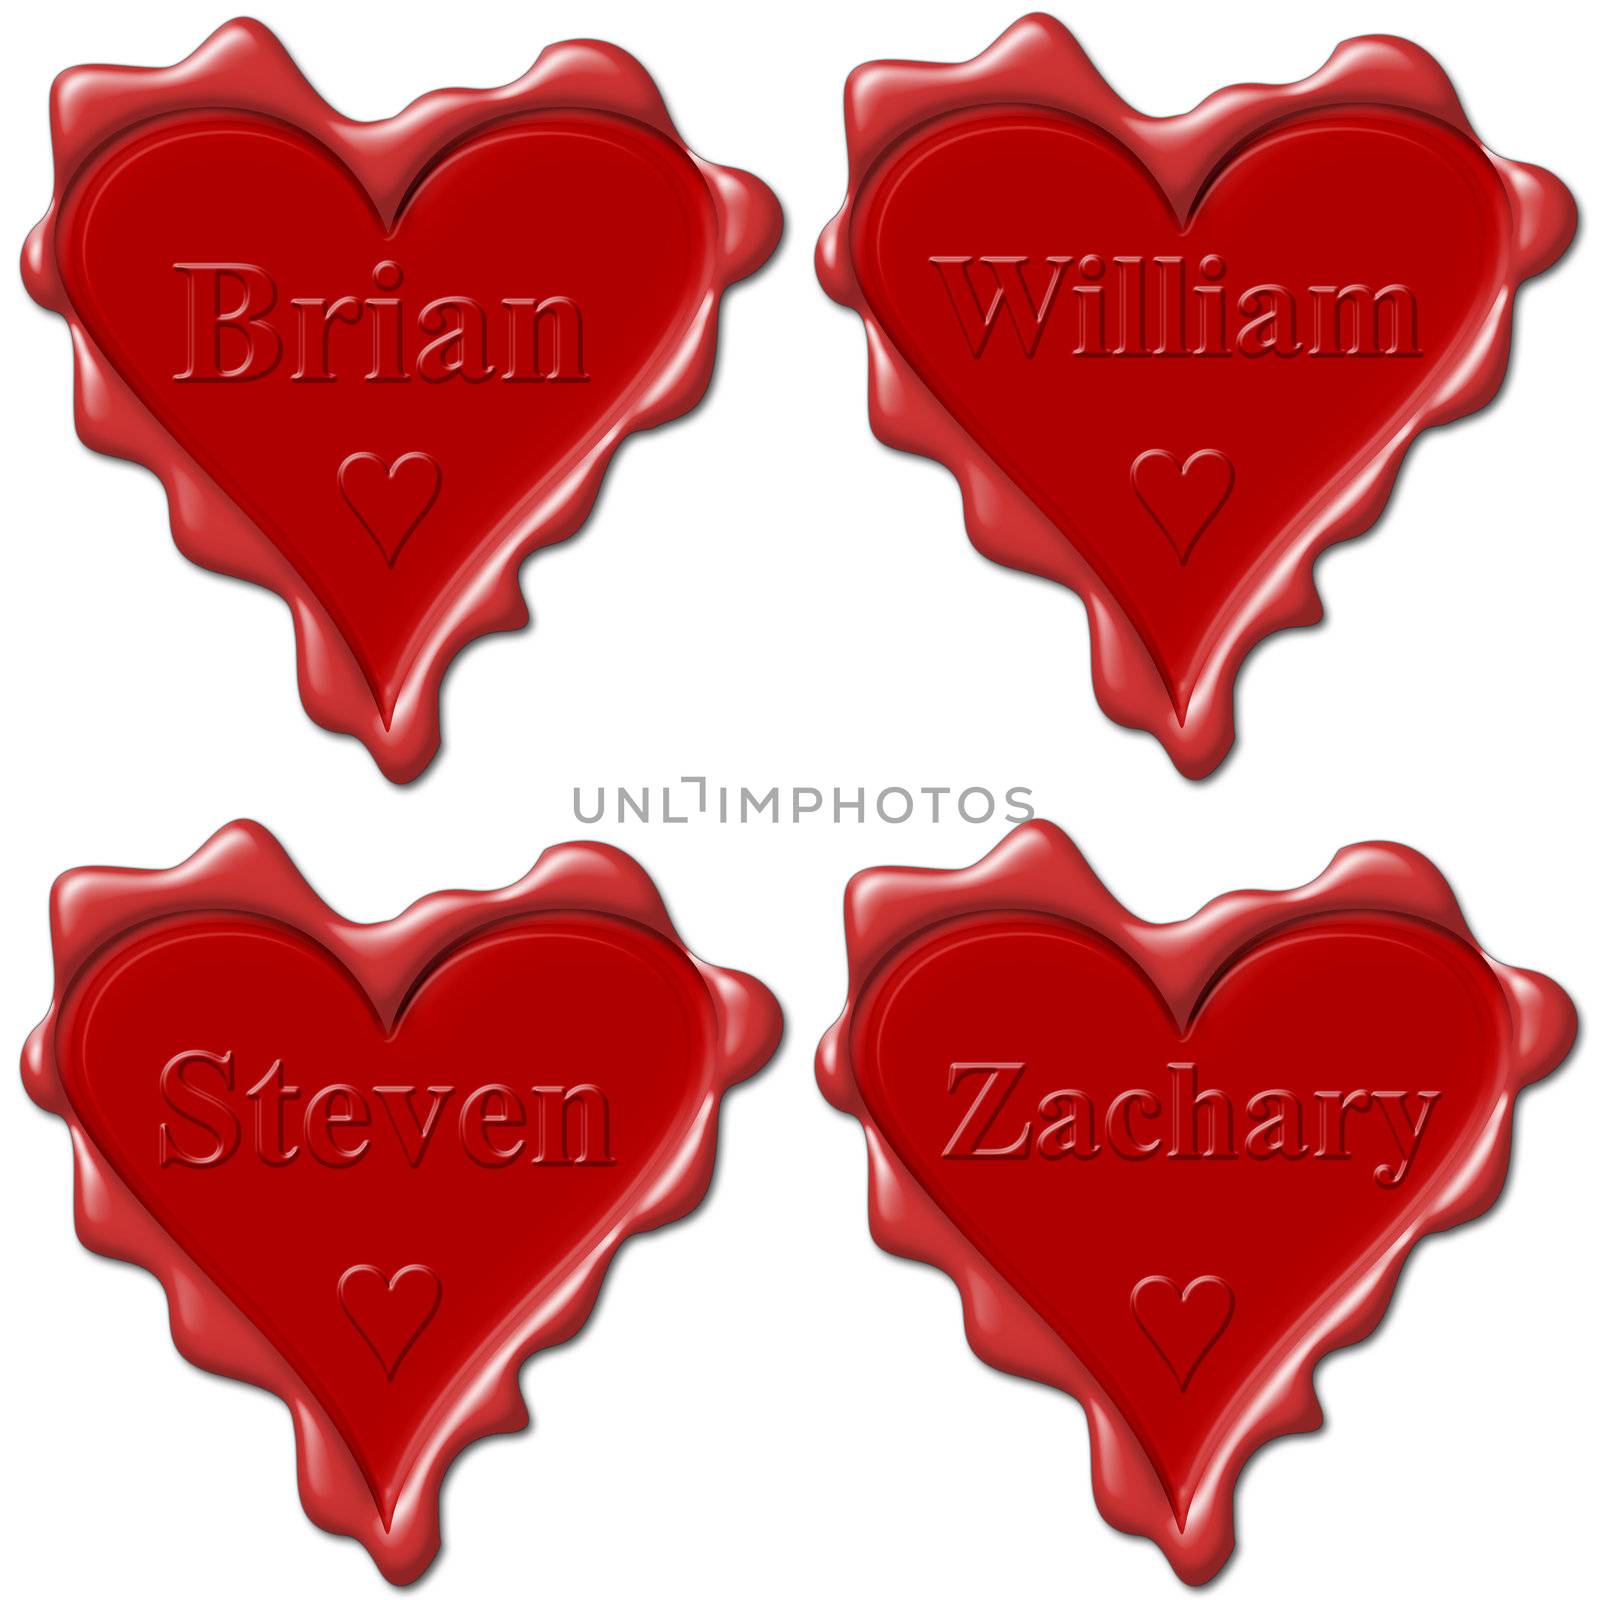 Valentine love hearts with names: Brian, William, Steven, Zachar by mozzyb